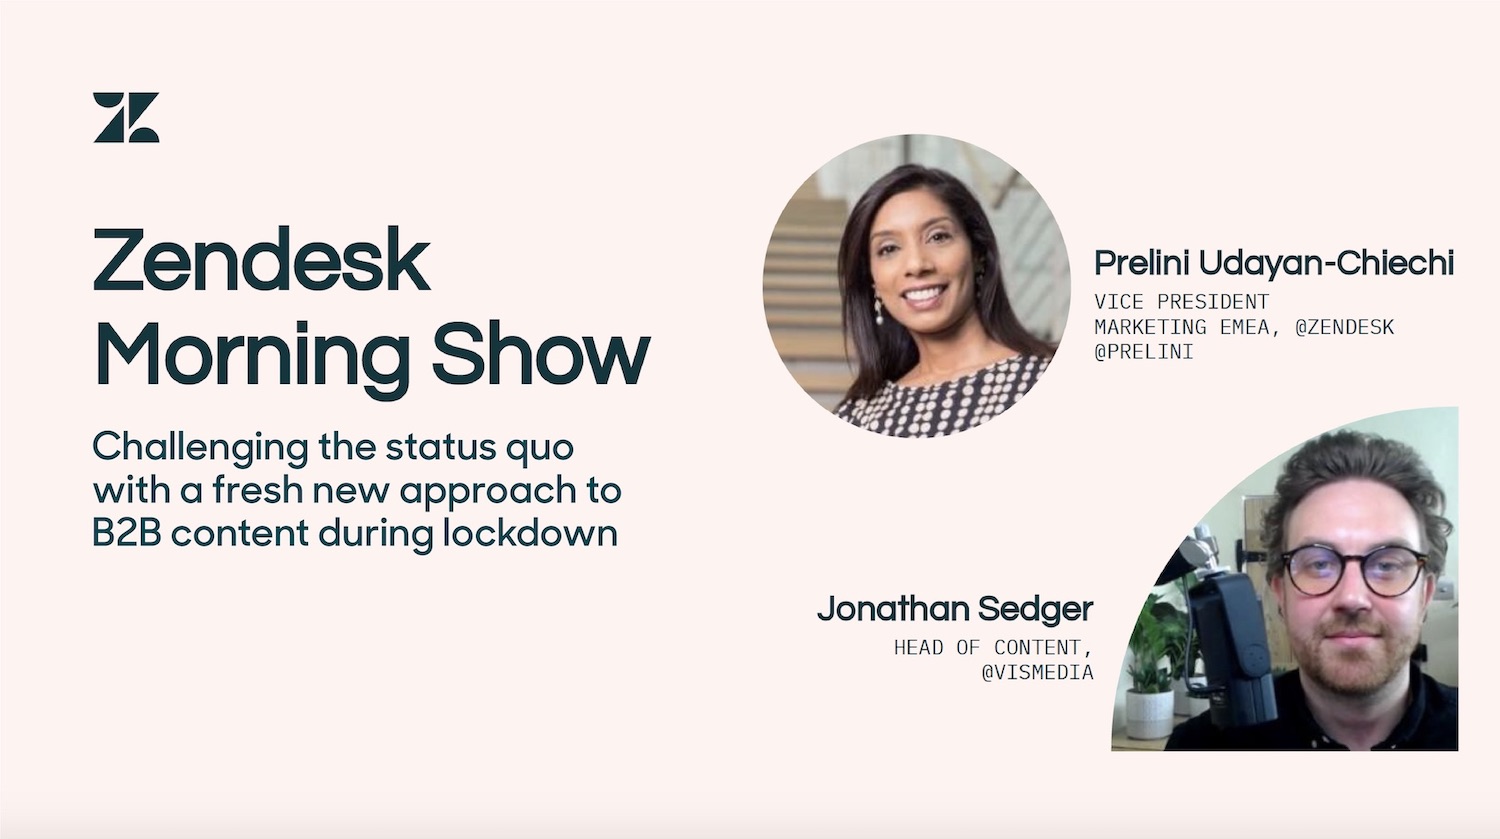 Titlecard for Zendesk Morning Show B2B Ignite presentation featuring Prelini Udayan-Chiechi and Jonathan Sedger